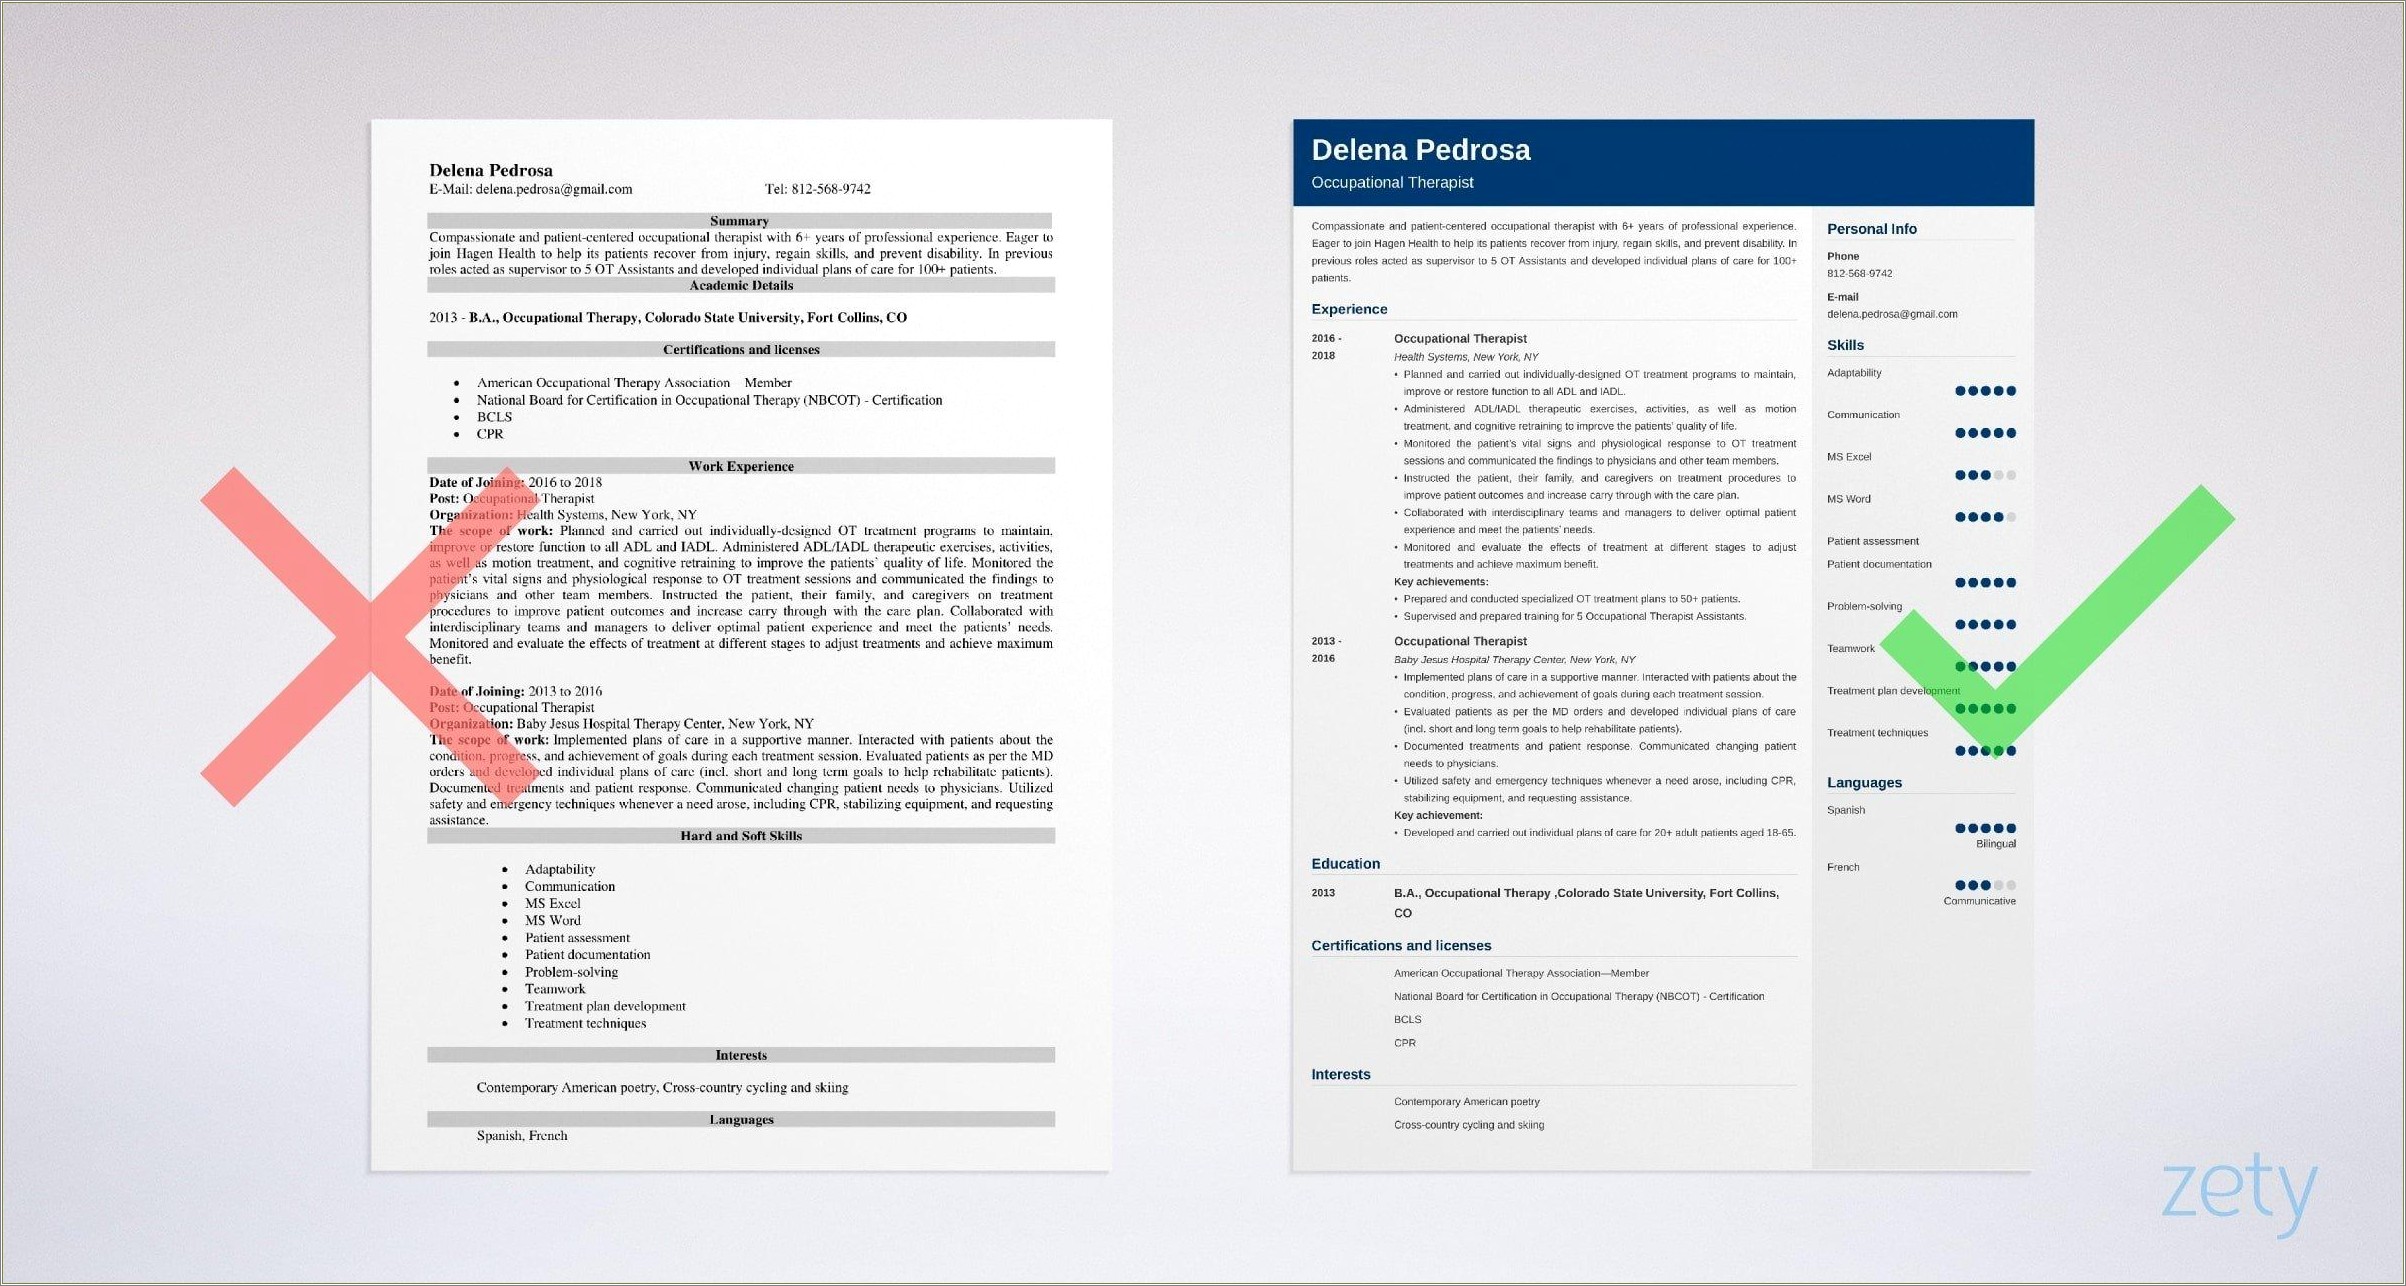 Resume Samples For New Occupational Therapist Positions